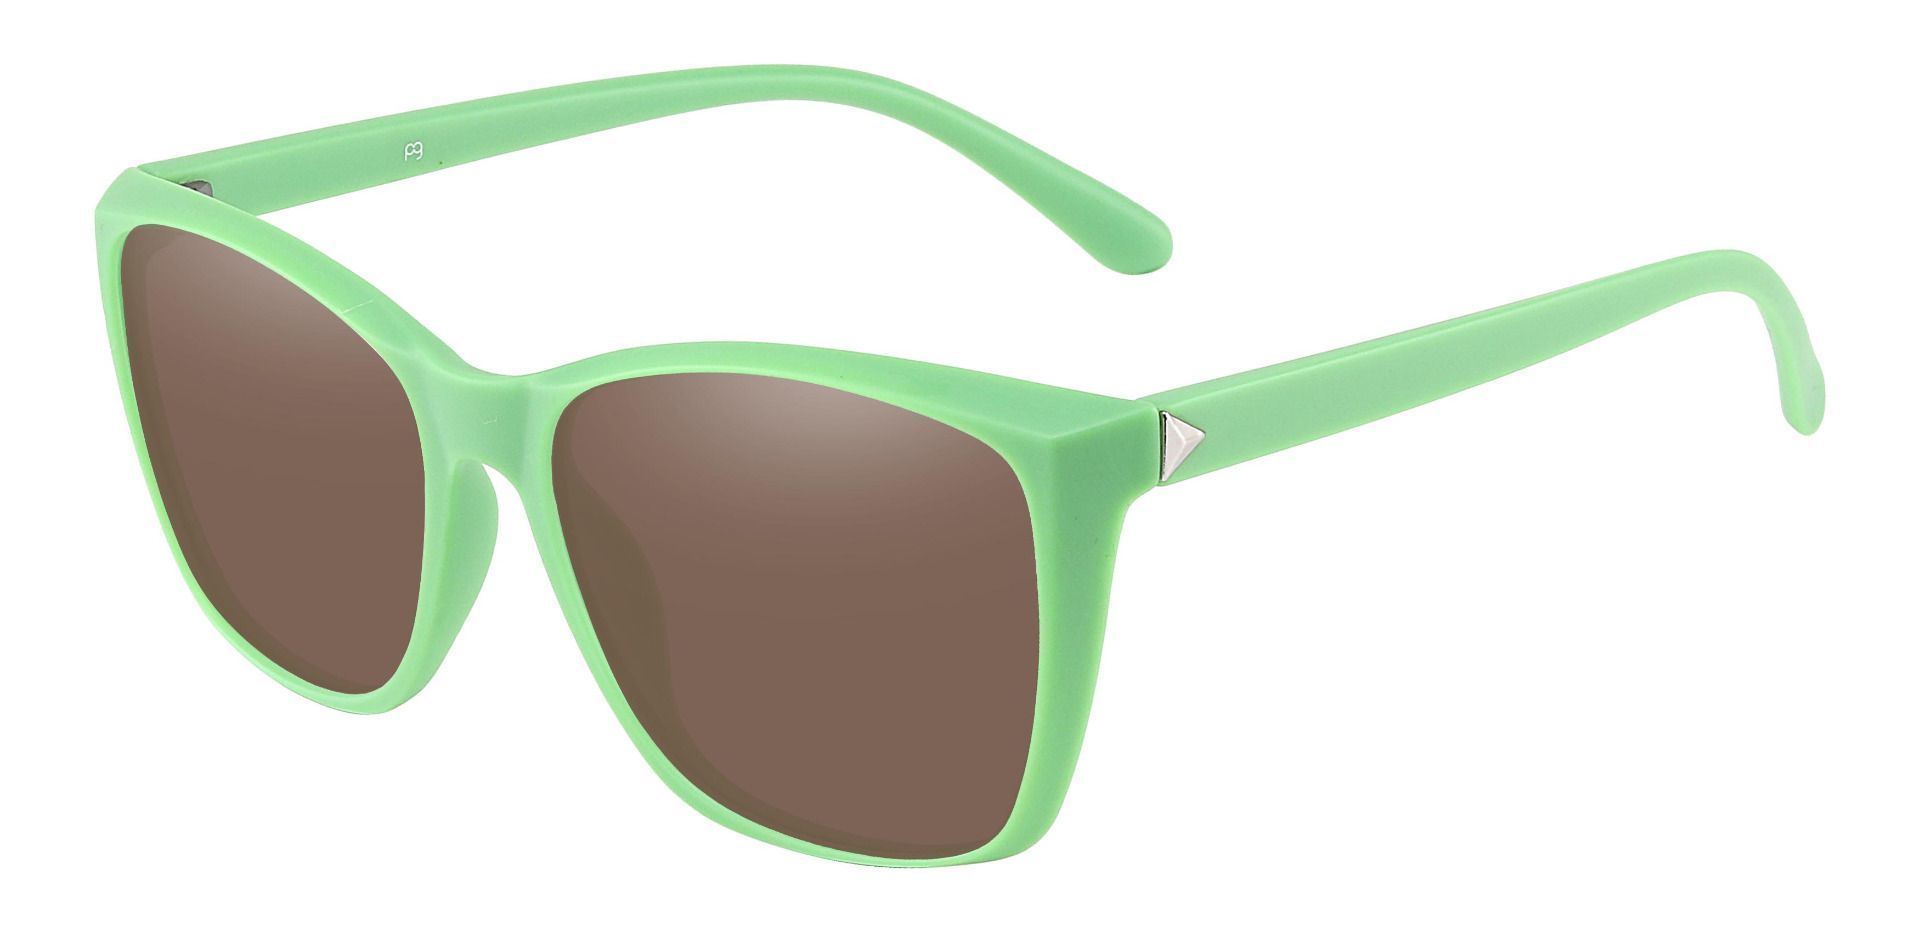 Hickory Square Non-Rx Sunglasses - Green Frame With Brown Lenses